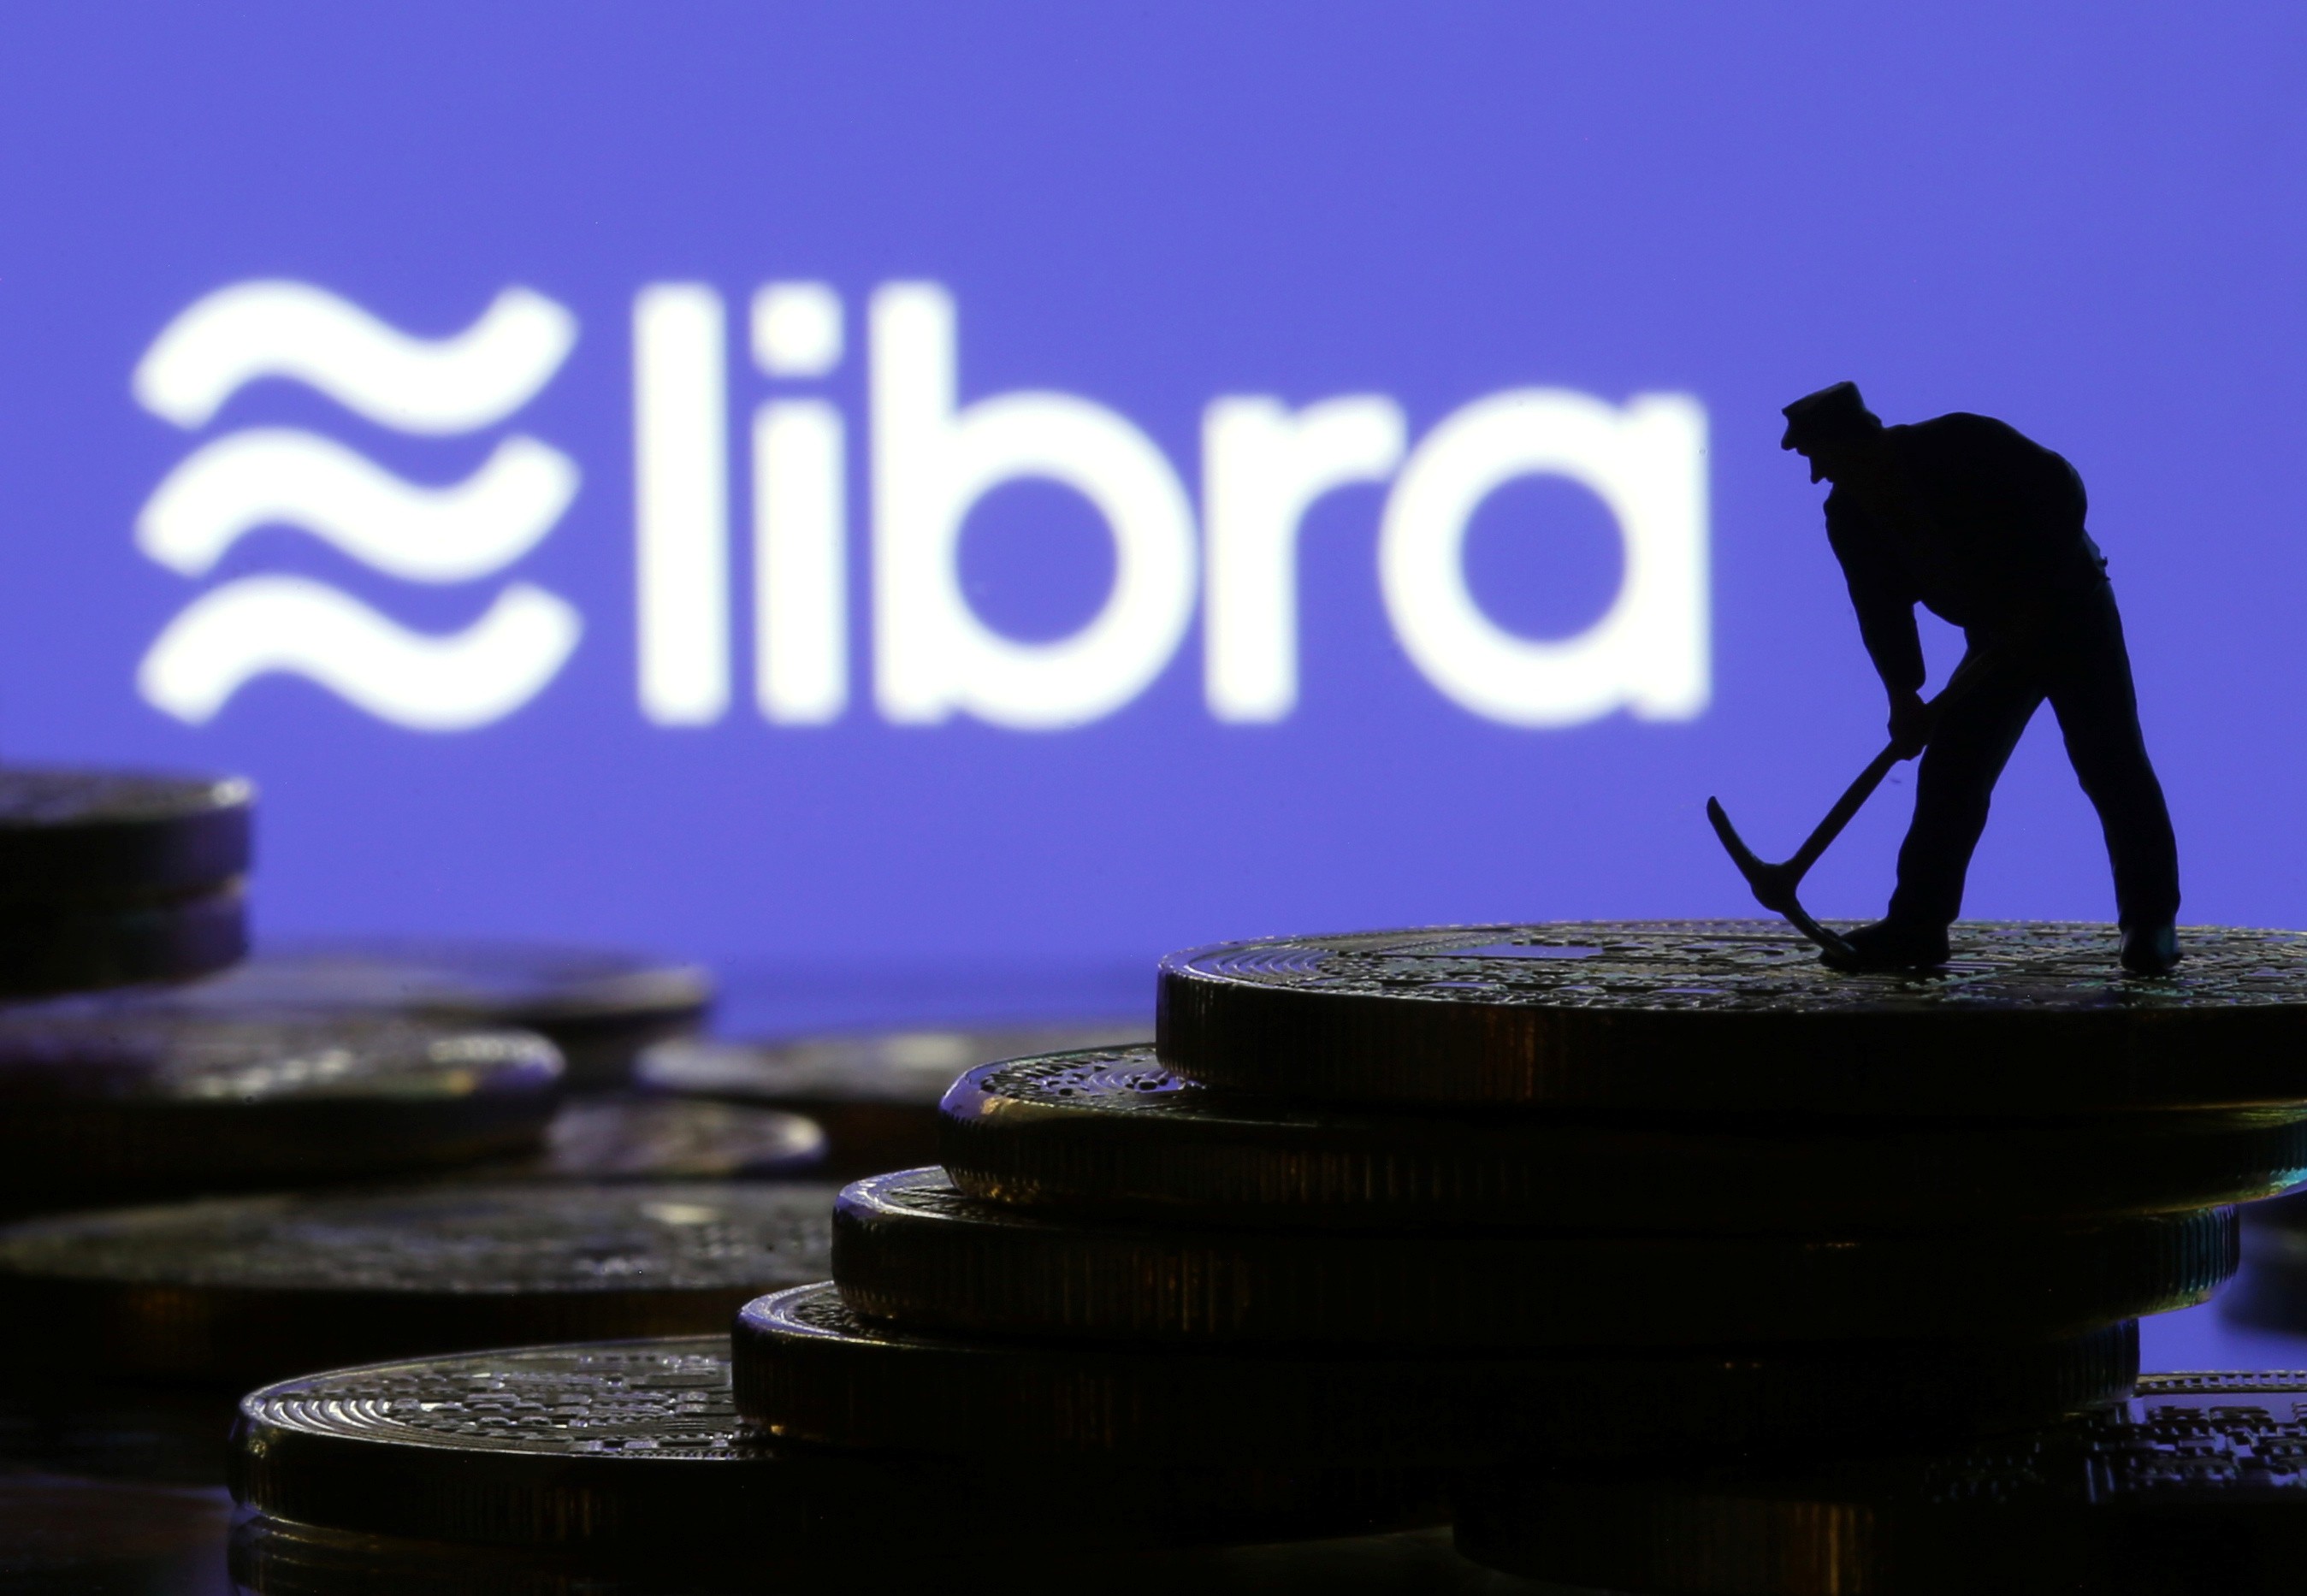 Facebook executives have said they hope the launch of Libra will expand access to financial services globally, but there are already concerns about how much data it will be able to harvest from users. Photo: Reuters